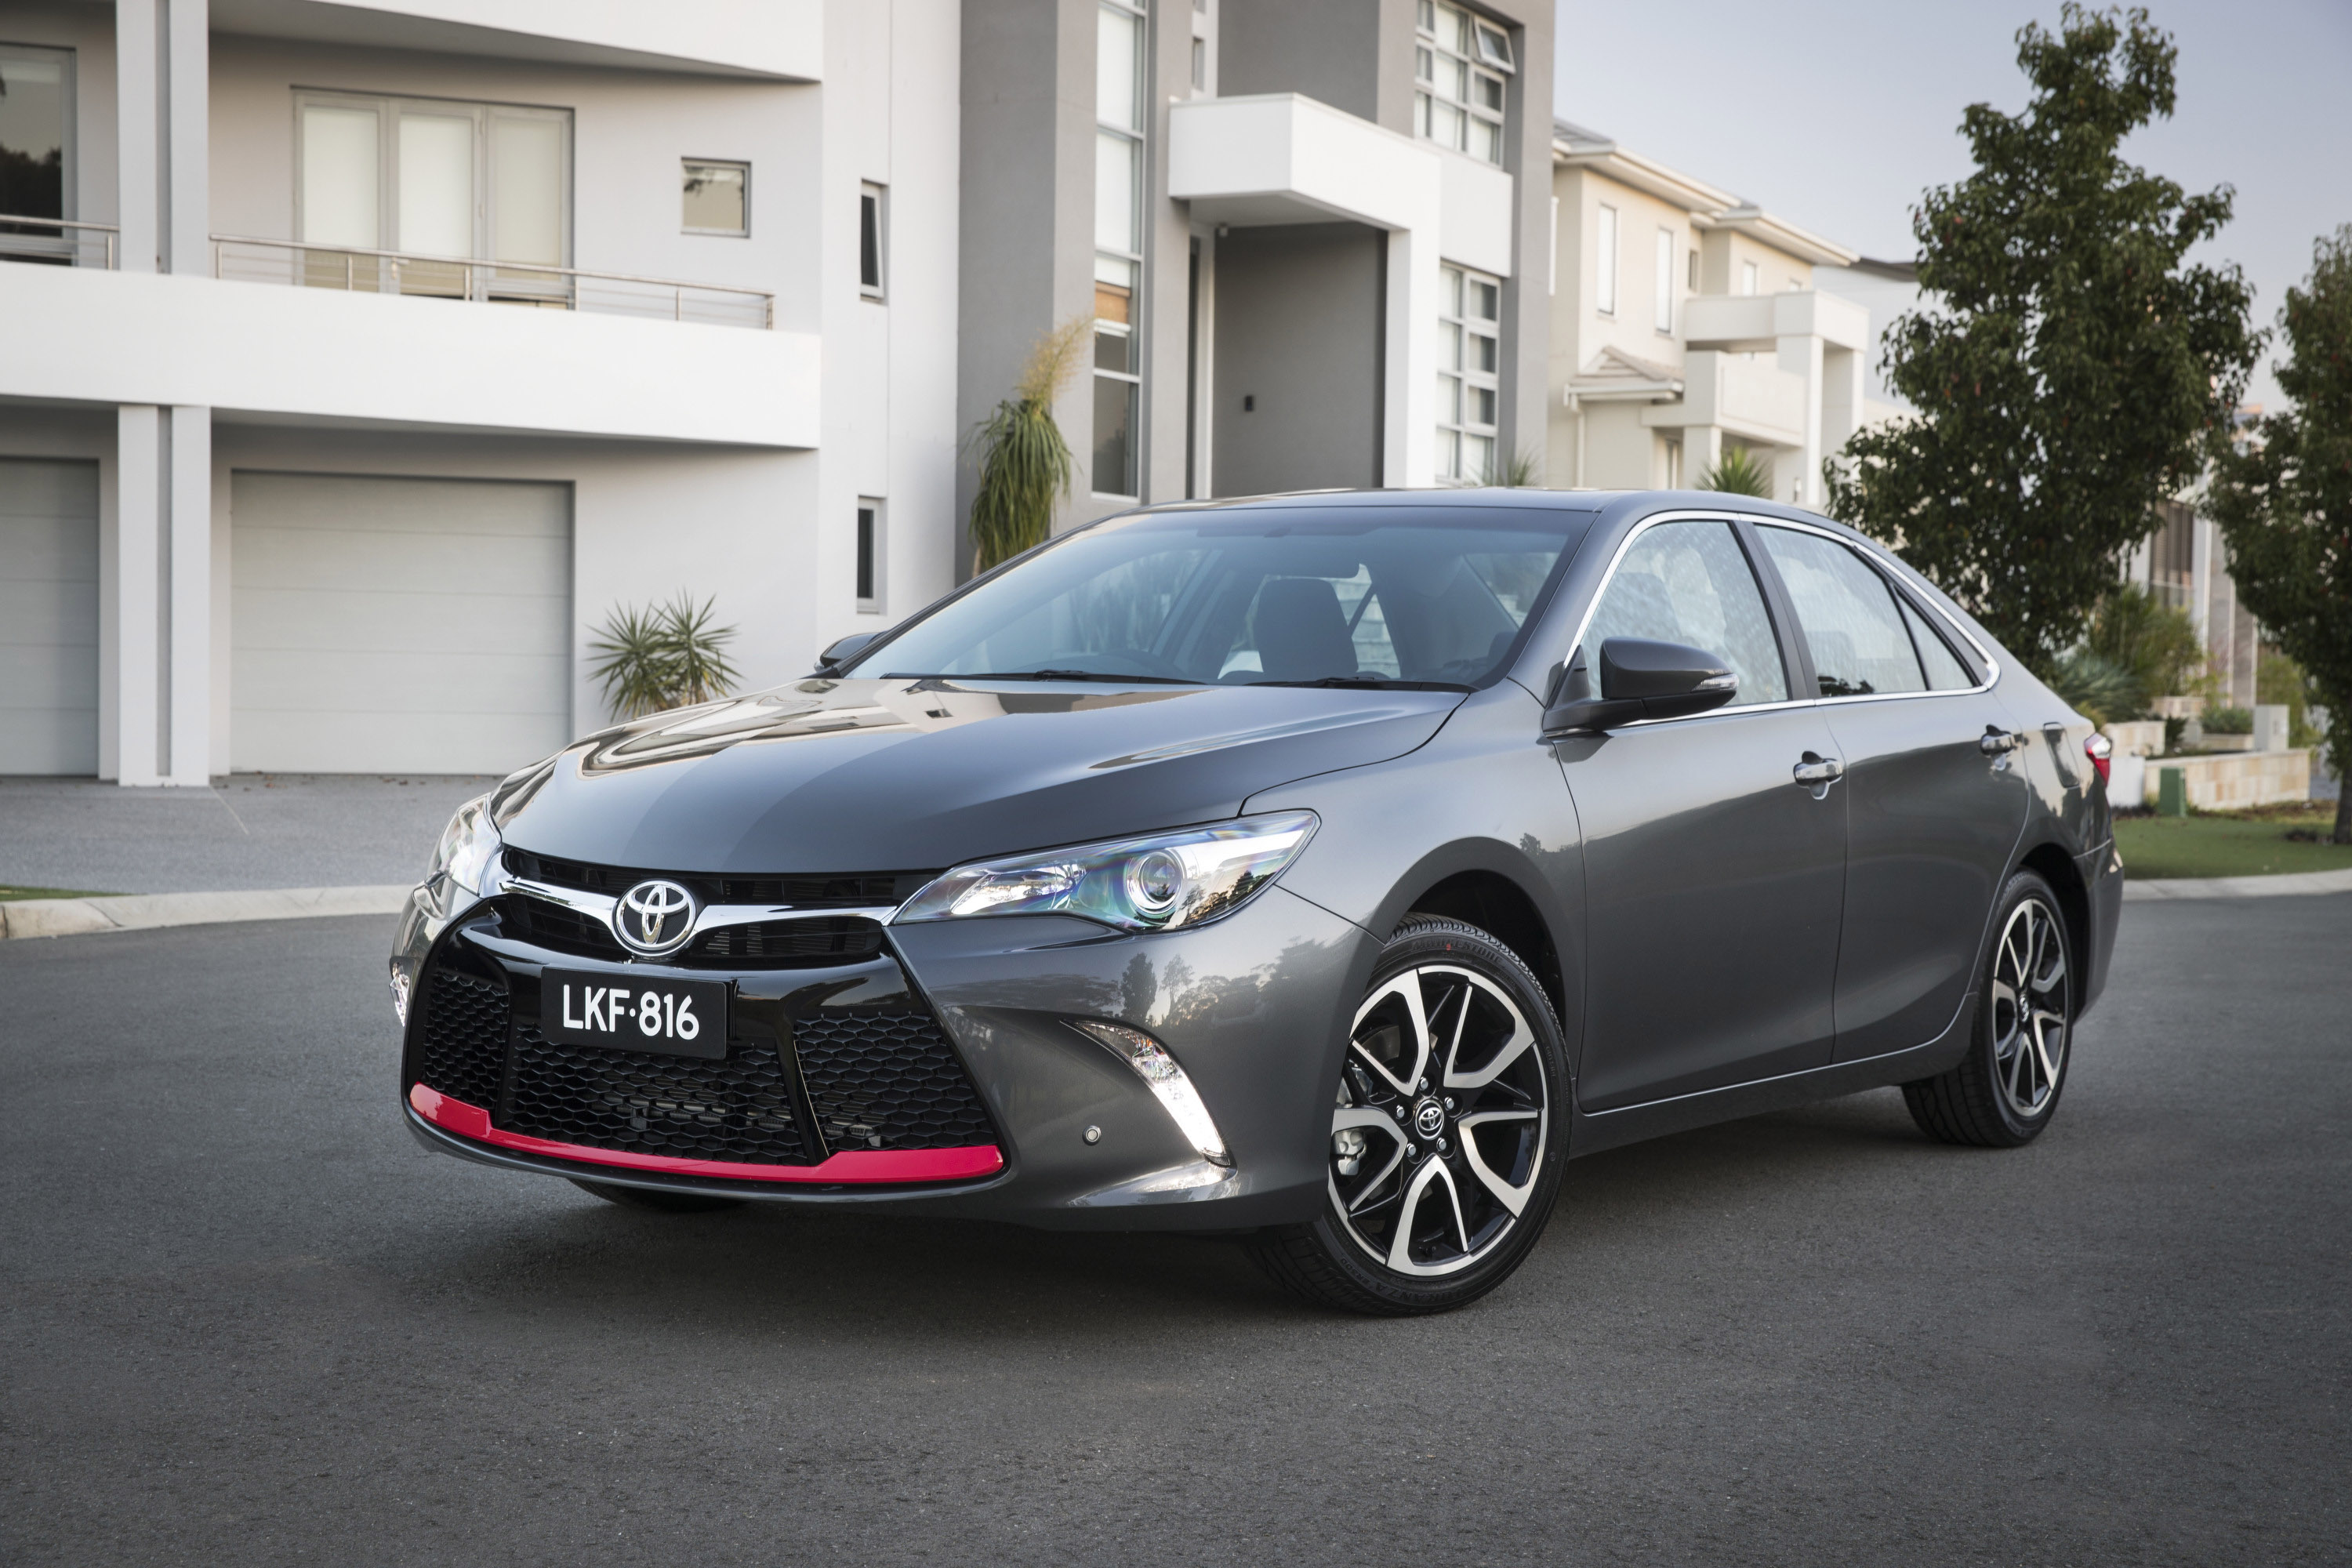 2016 TOYOTA Camry Pictures, Prices and Reviews - Driverbase